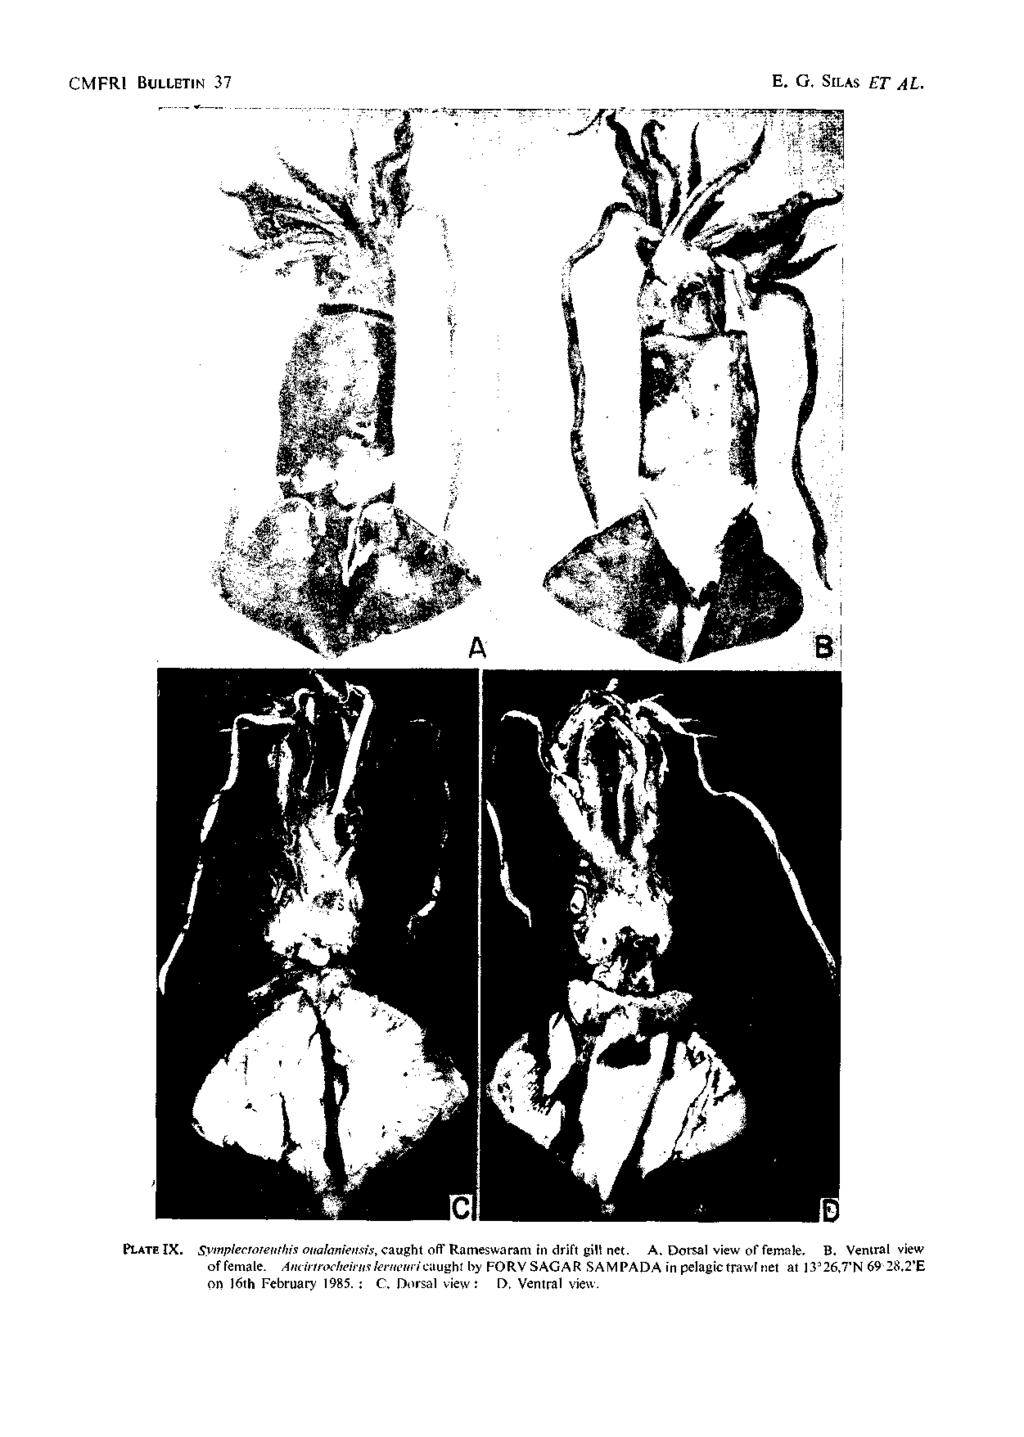 CMFRI BULLETIN 37 E. G. SILAS ET AL. PLATE IX. Symplectoteiithis oualamensis, caught off Kameswaram in drift giw net. A. Dorsal view of female. B. Ventral view of female.